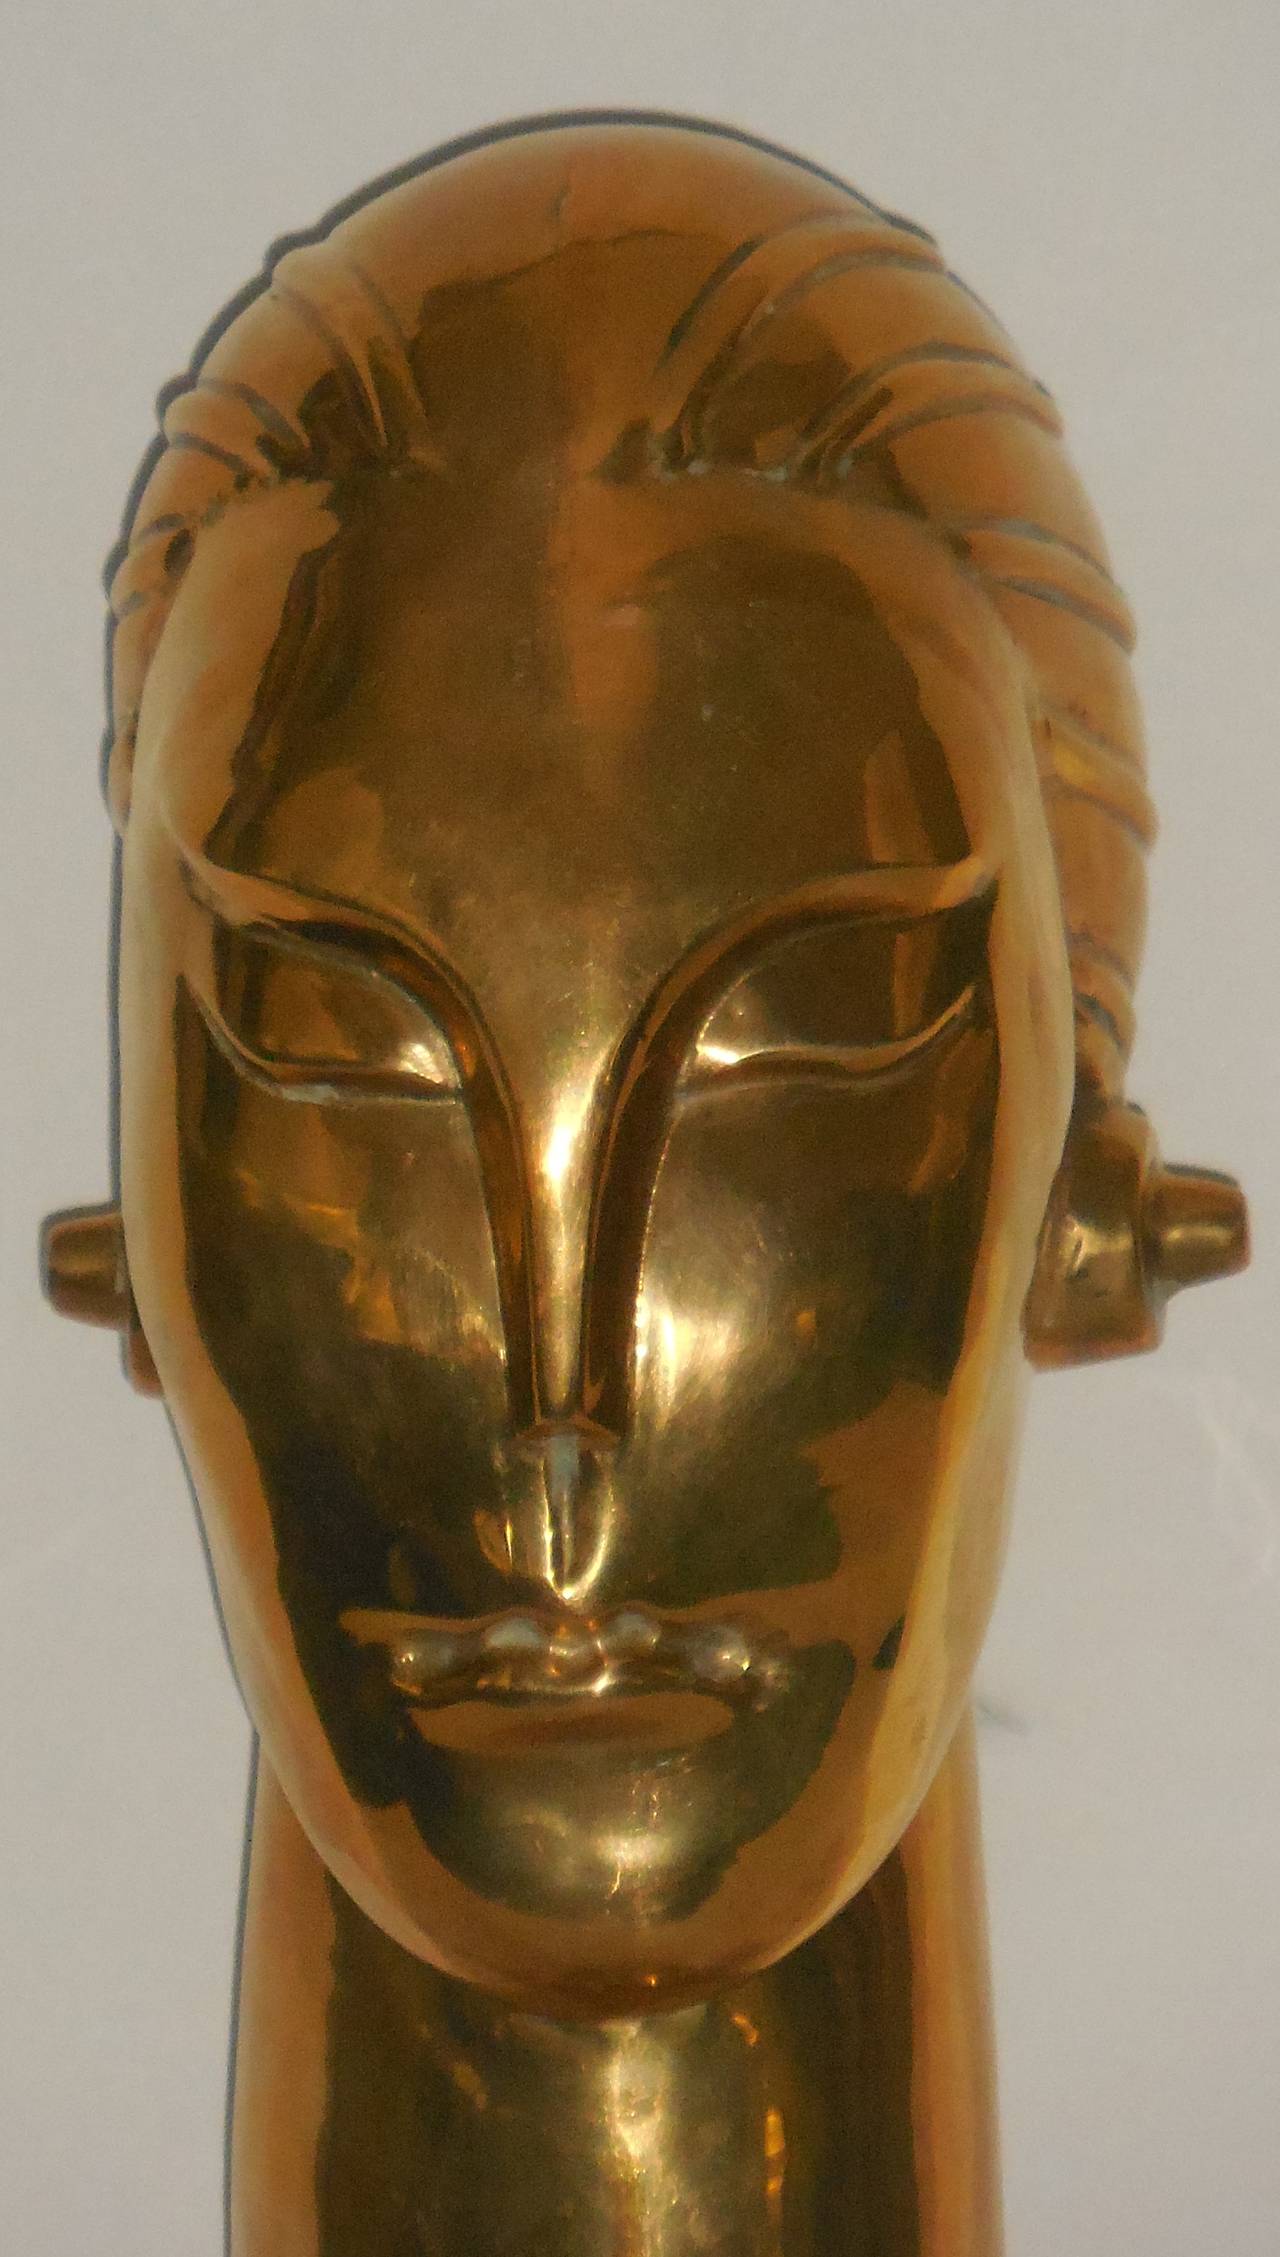 Beautiful bust of a futuristic man made of brass, great look.